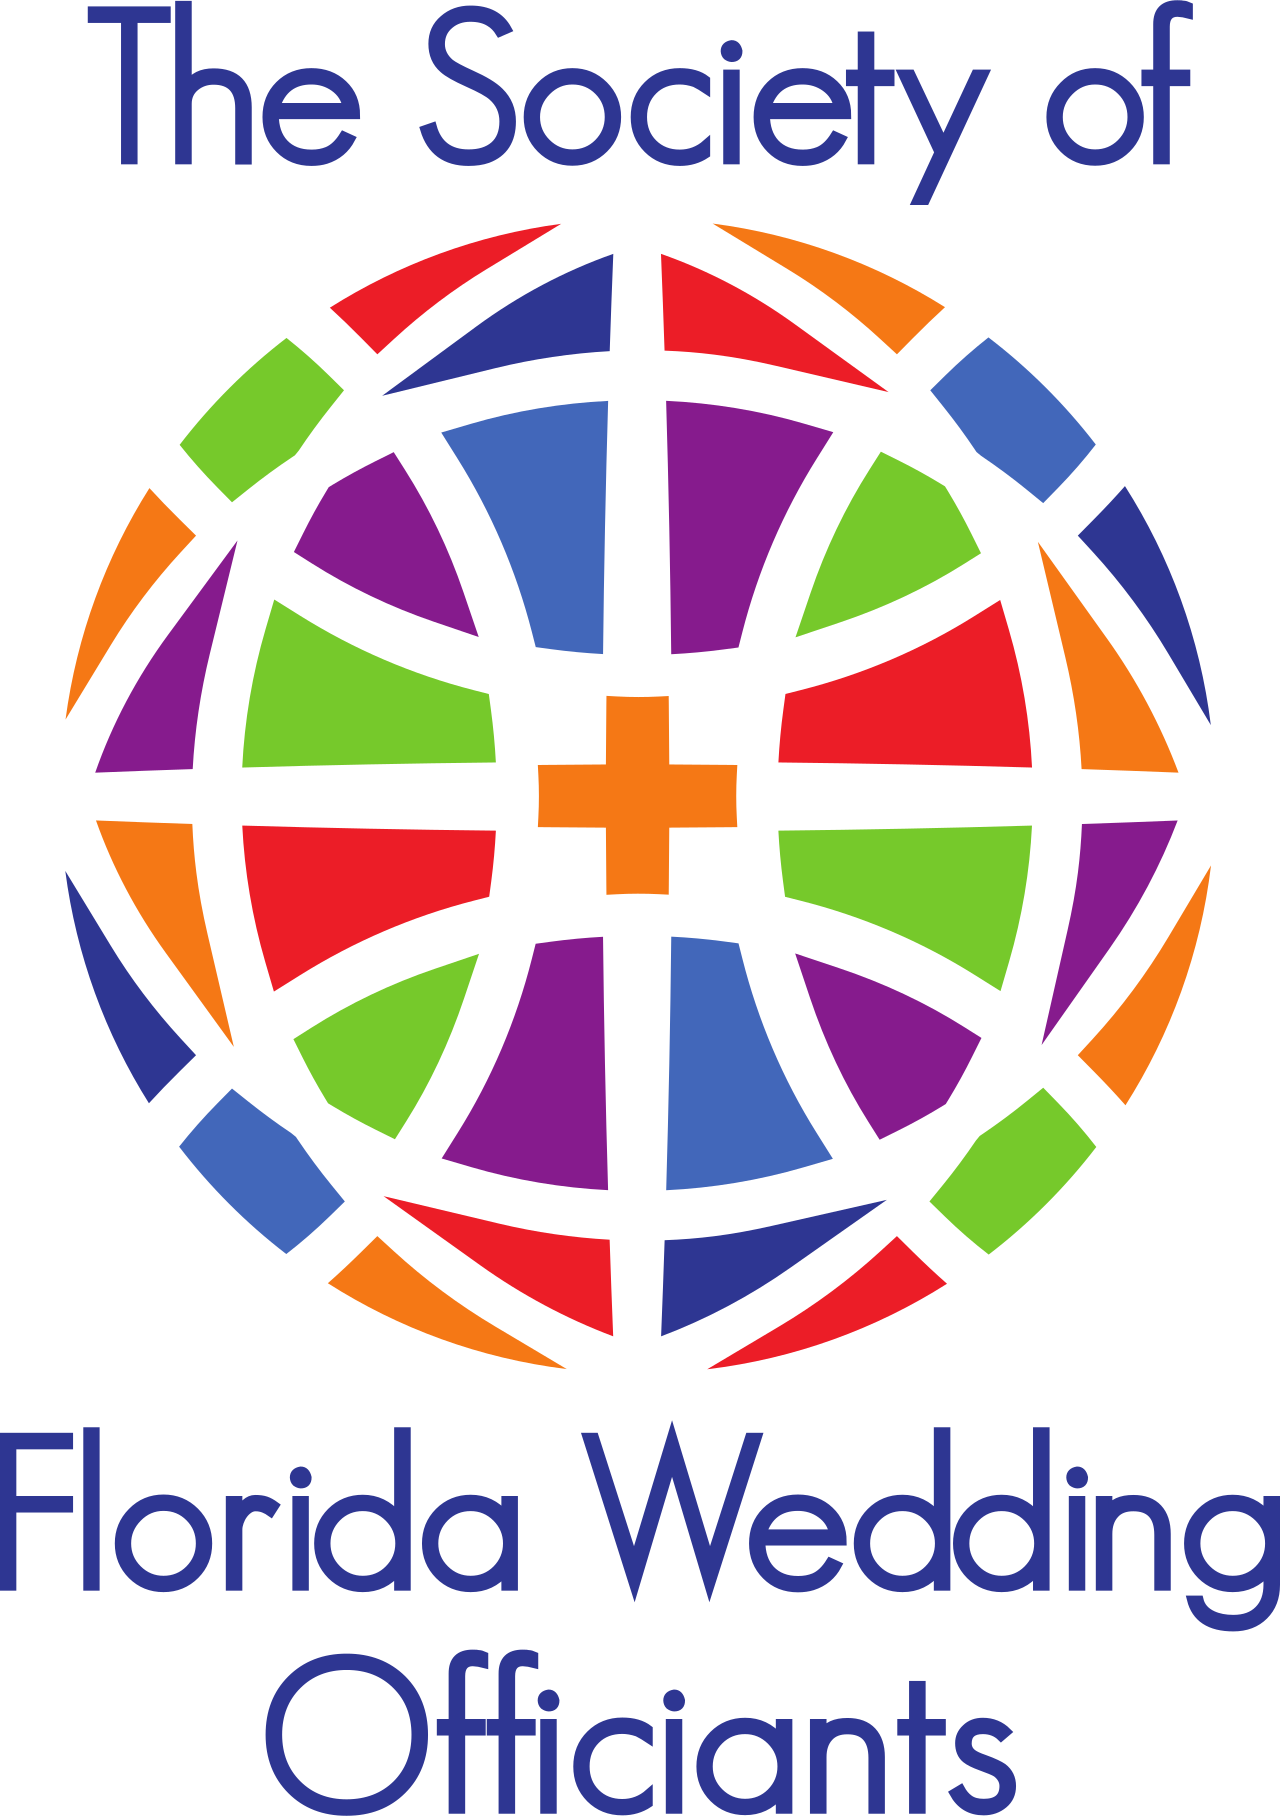 The Society of Florida Wedding Officiants